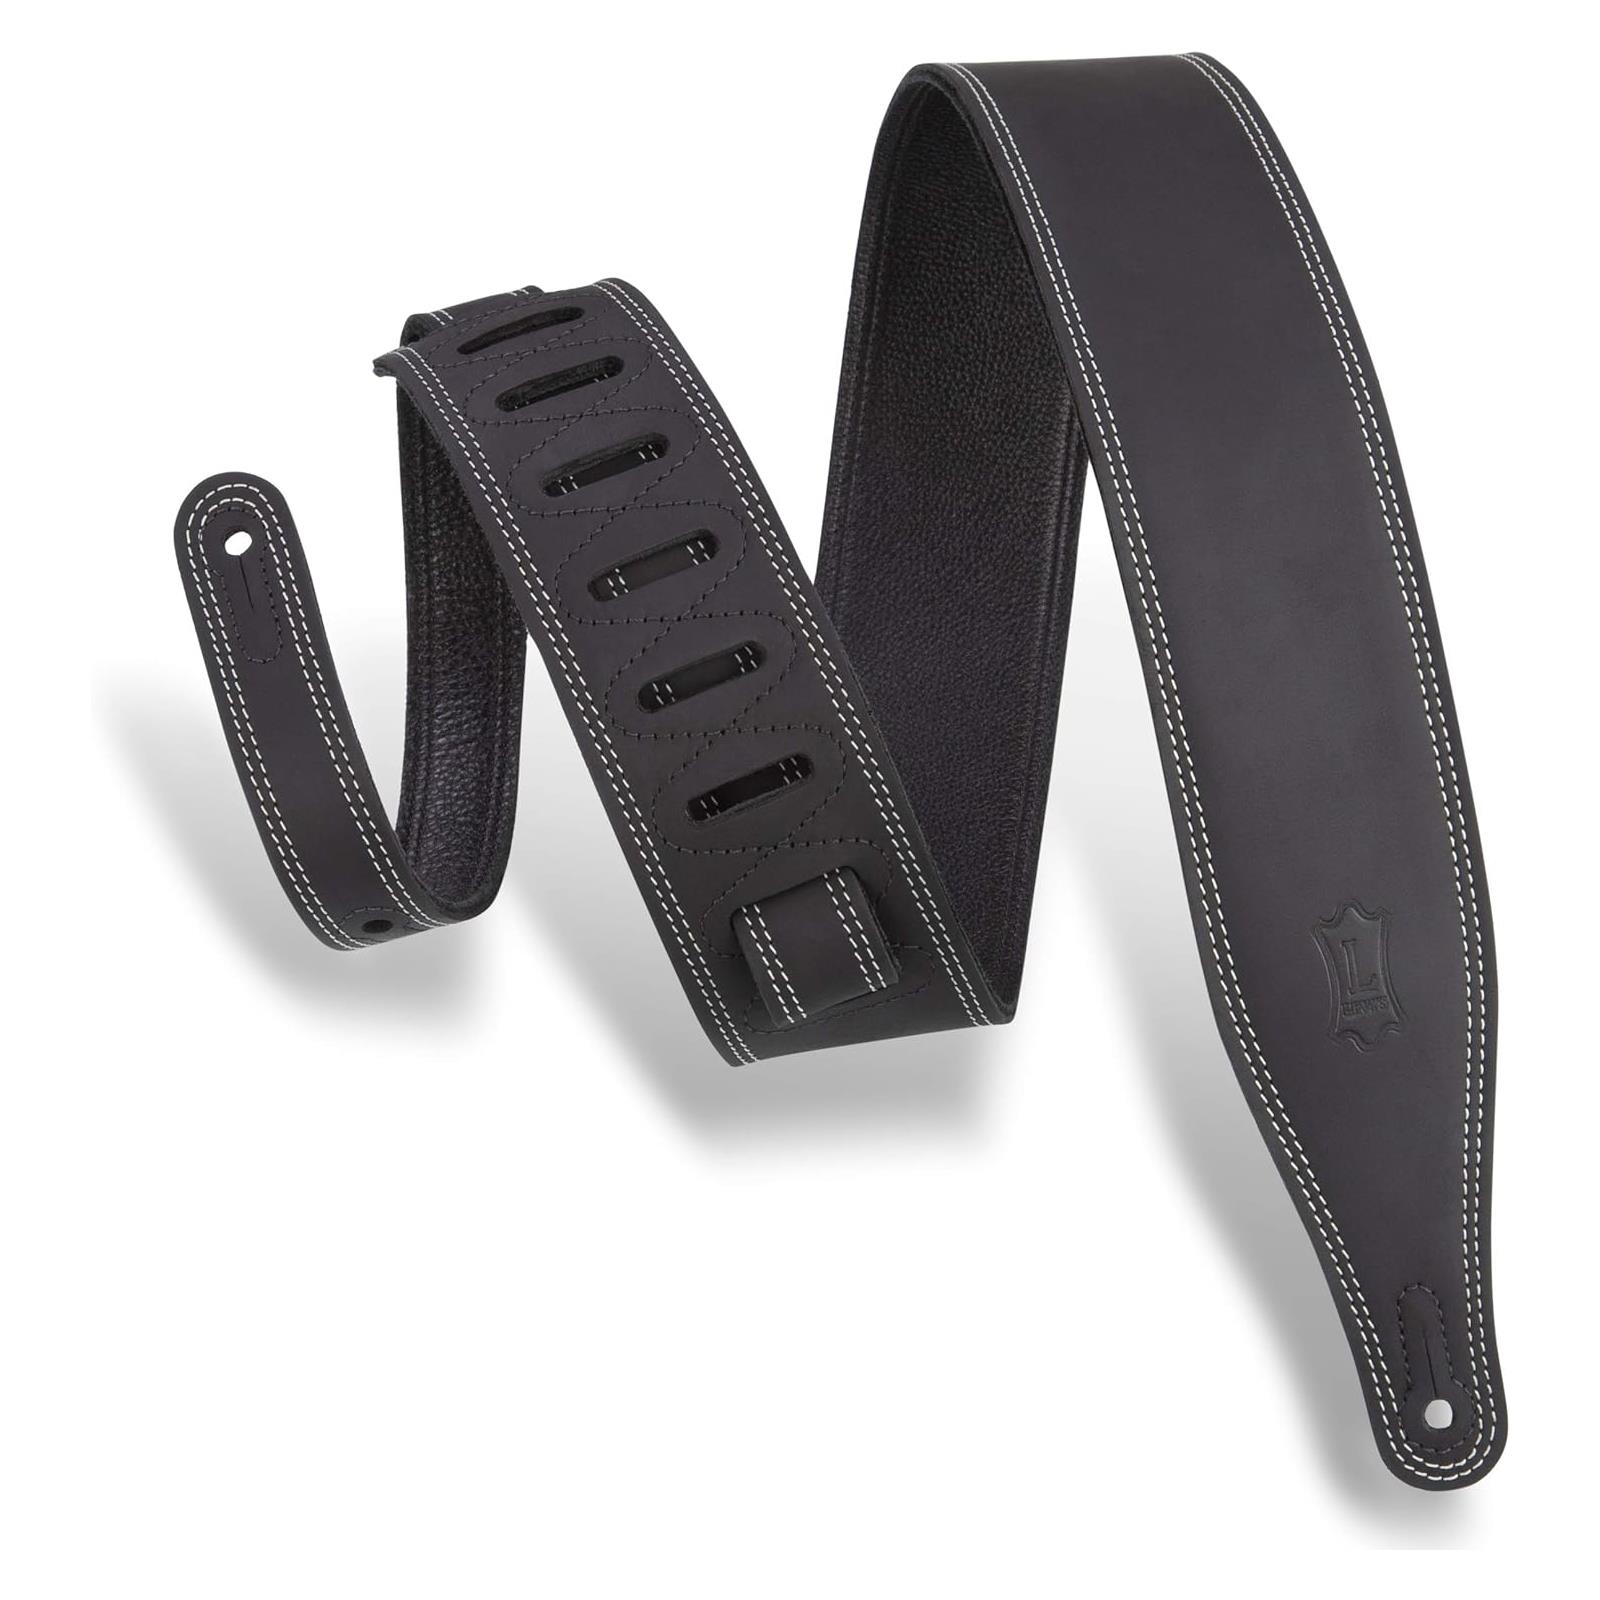 LEVY'S 2.5" Wide Garment Leather Guitar Strap